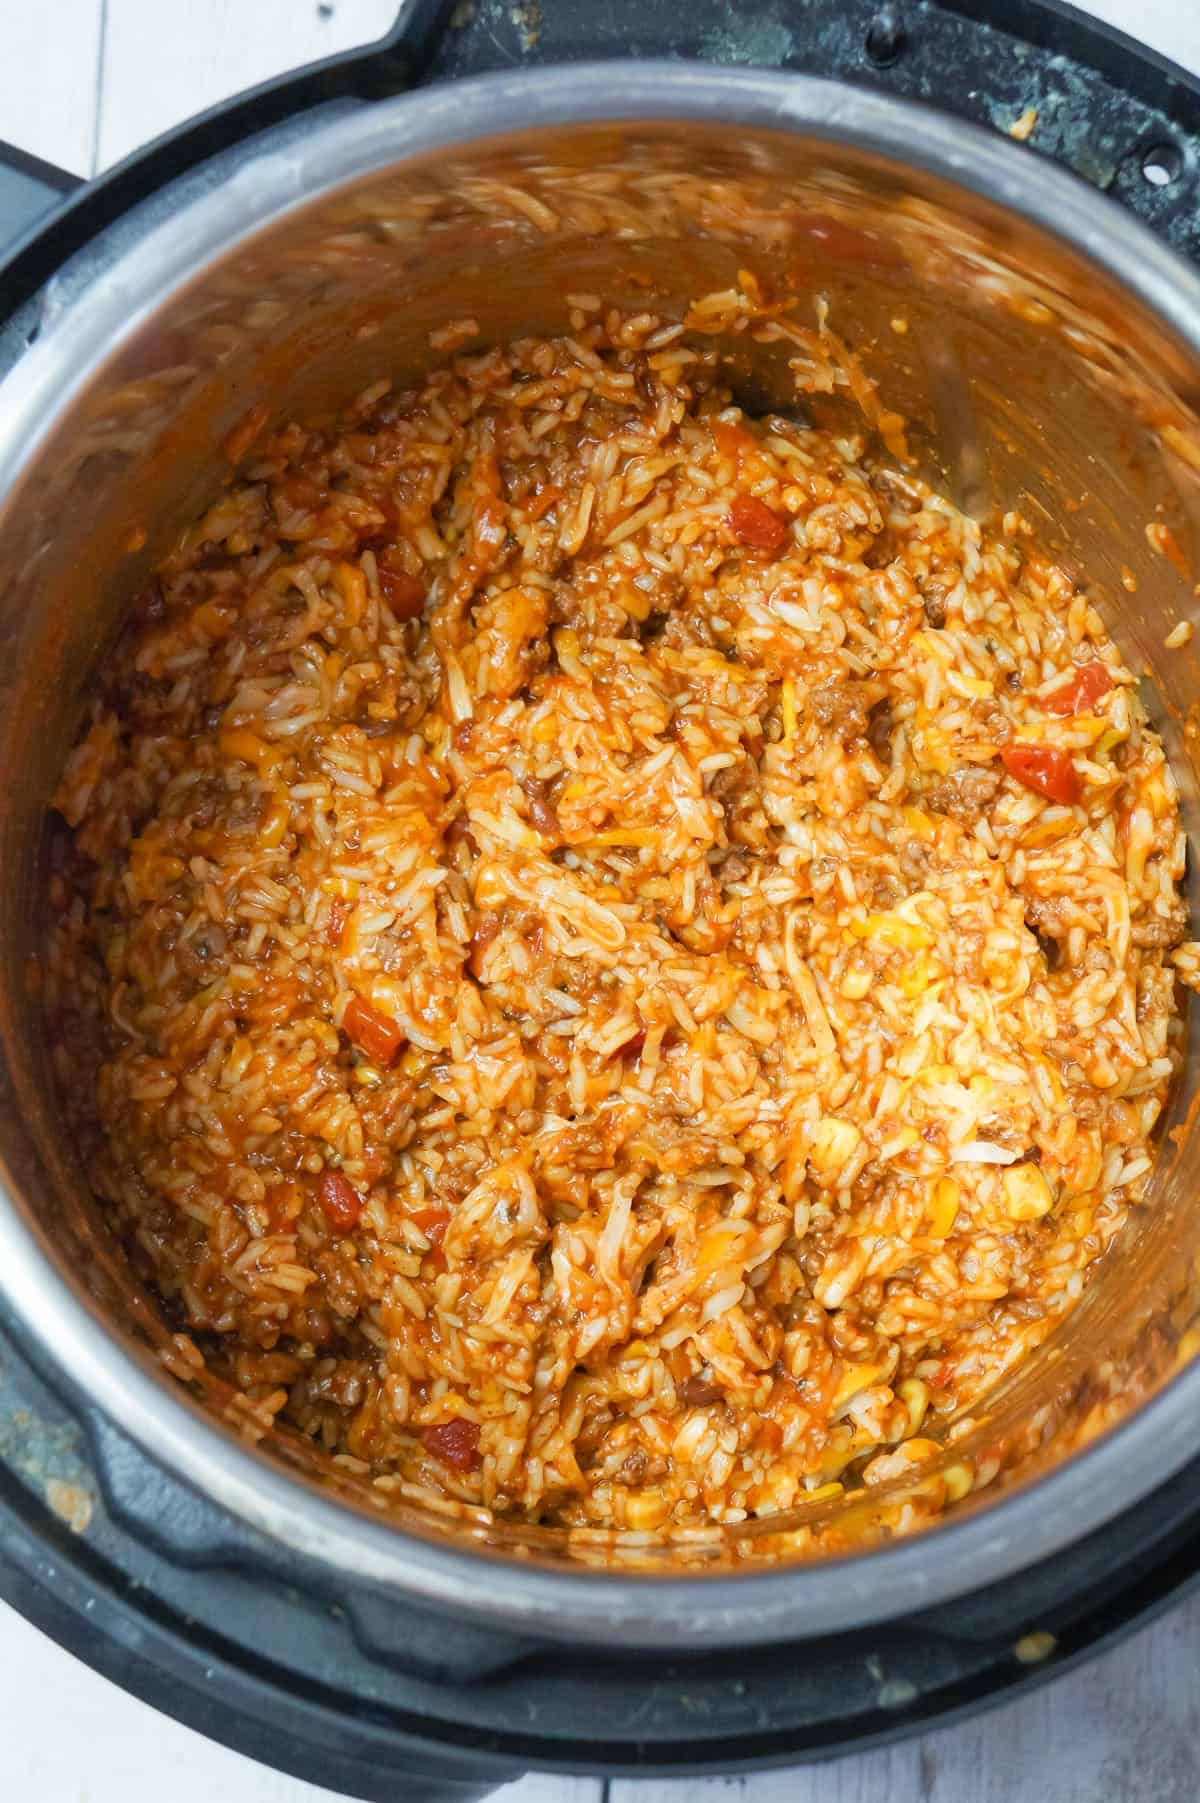 Instant Pot Cheesy Taco Ground Beef and Rice is an easy pressure cooker ground beef dinner recipe made with long grain white rice, corn and black bean salsa and Heinz chili sauce and loaded with shredded mozzarella and cheddar cheese.